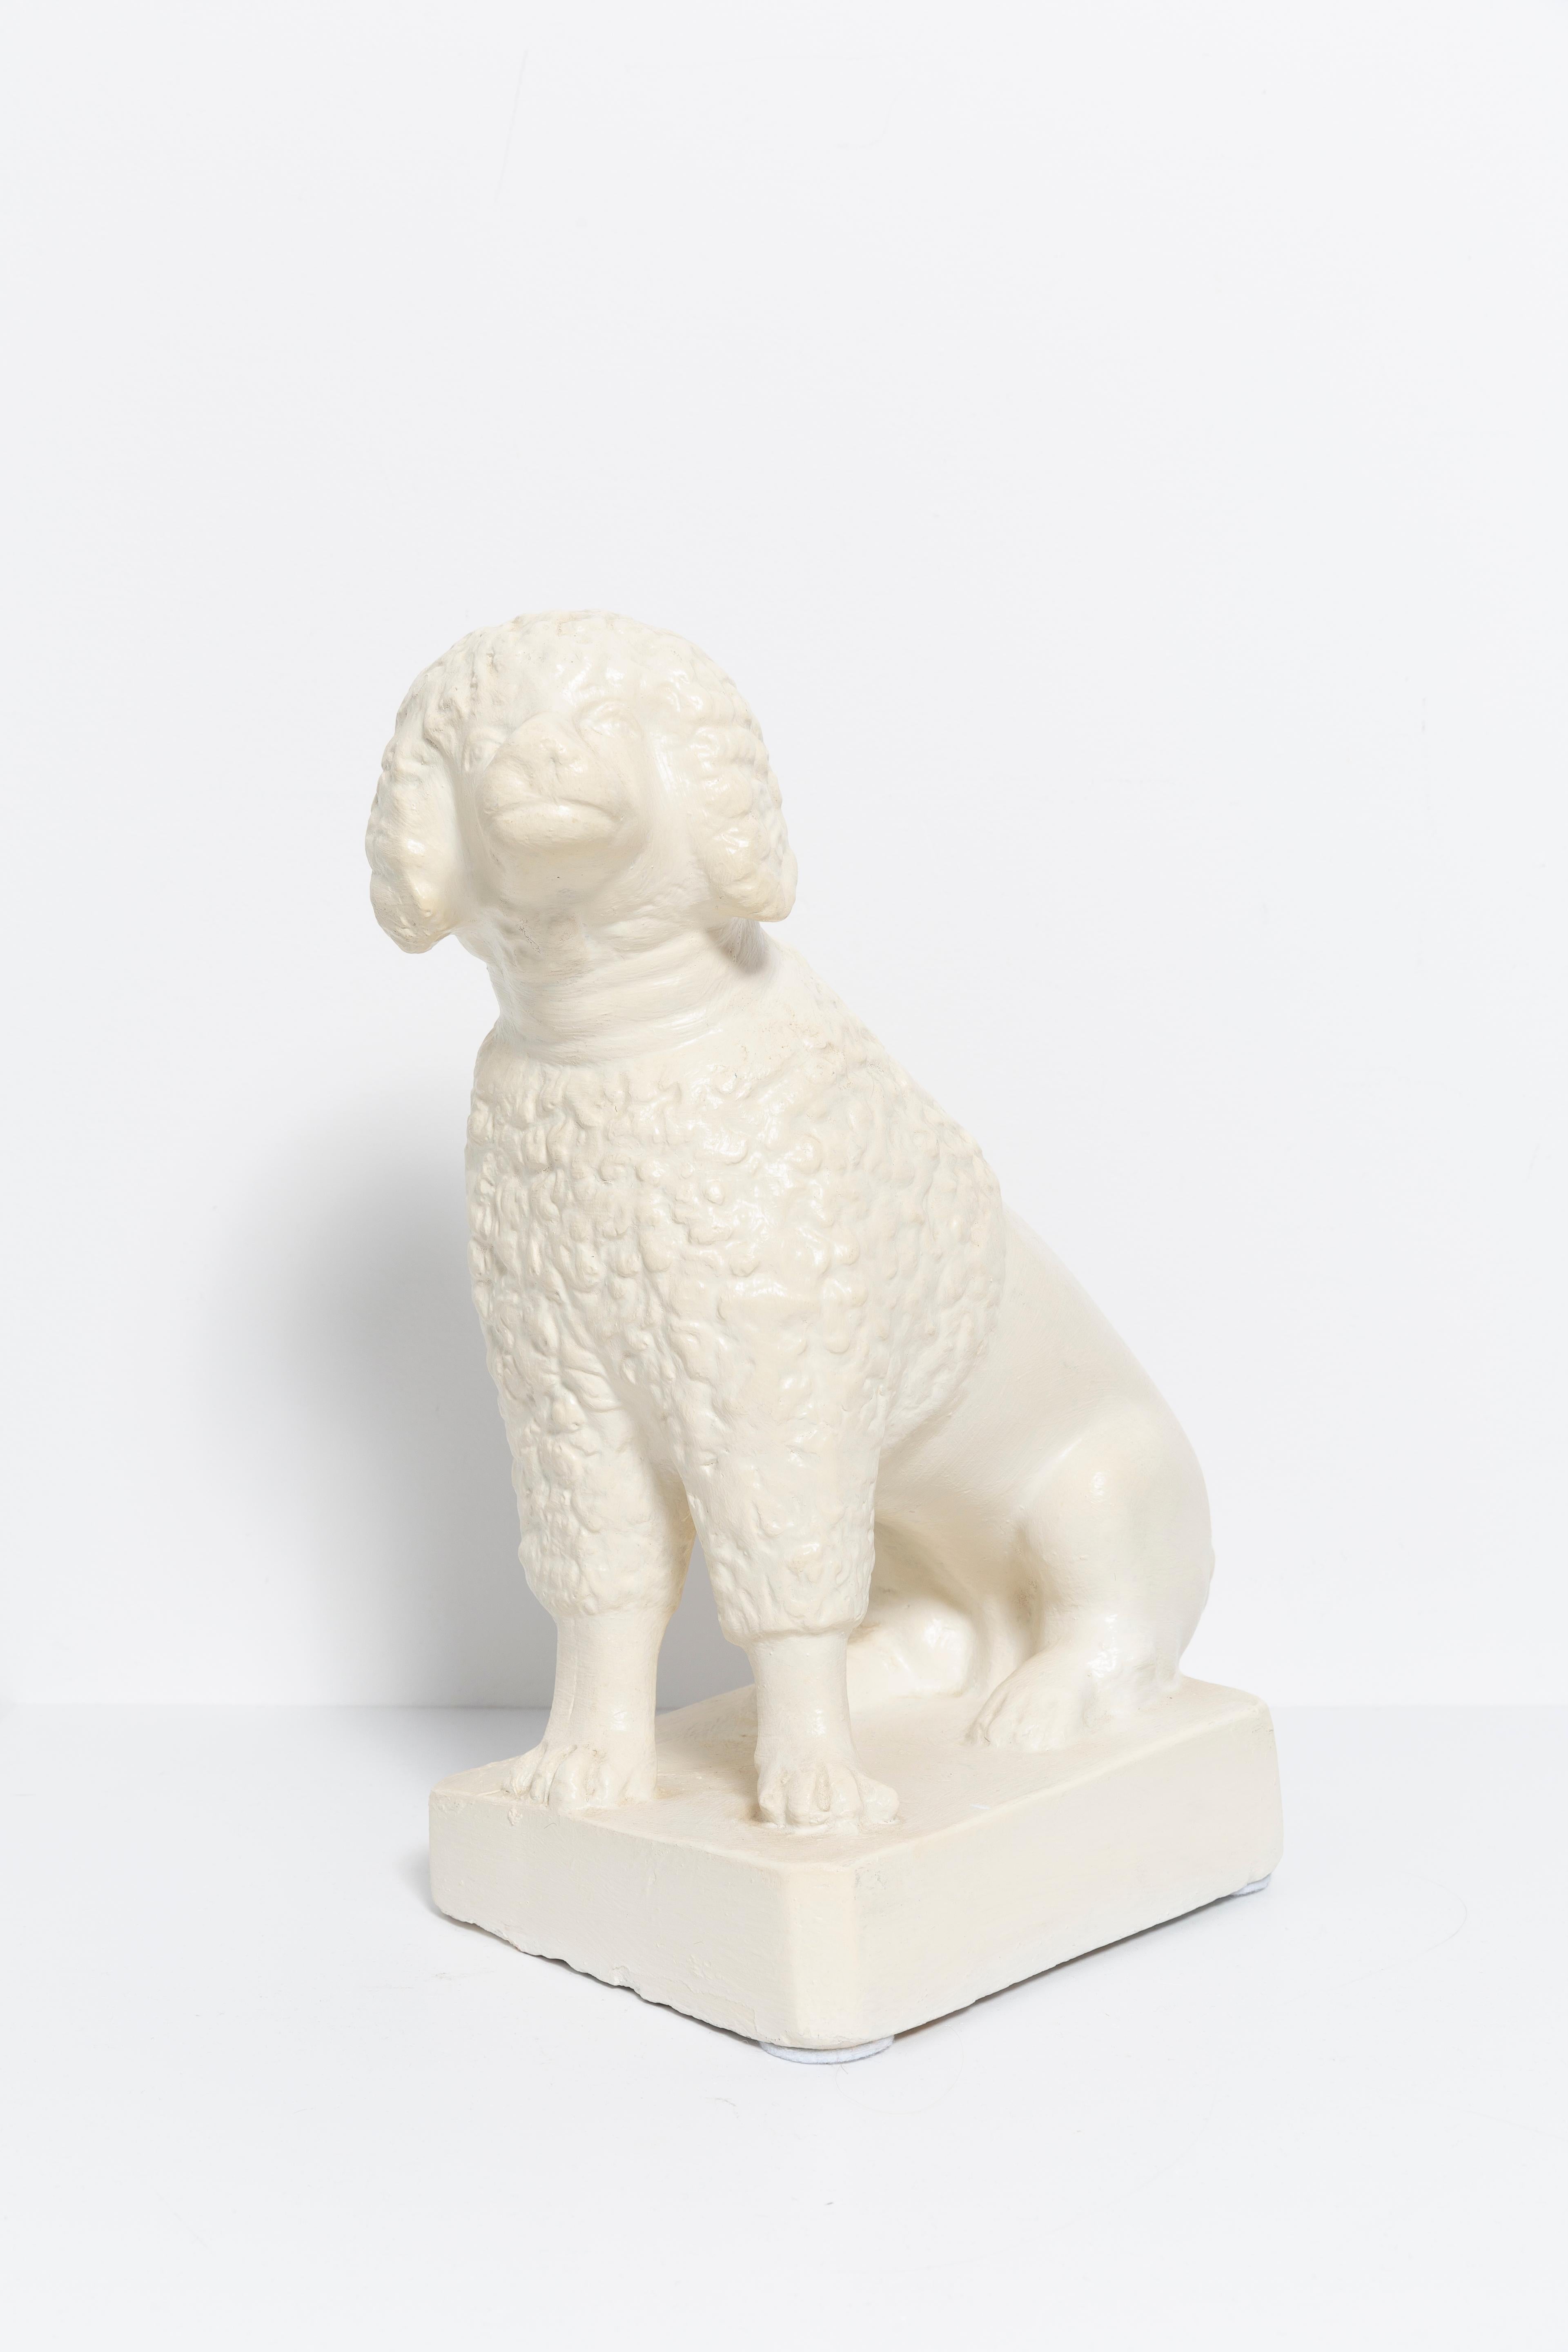 Painted gypsum, very good original vintage condition. No damages or cracks. Beautiful and unique decorative sculpture. White Poodle Dog Sculpture was produced in Italy. Only one dog available.